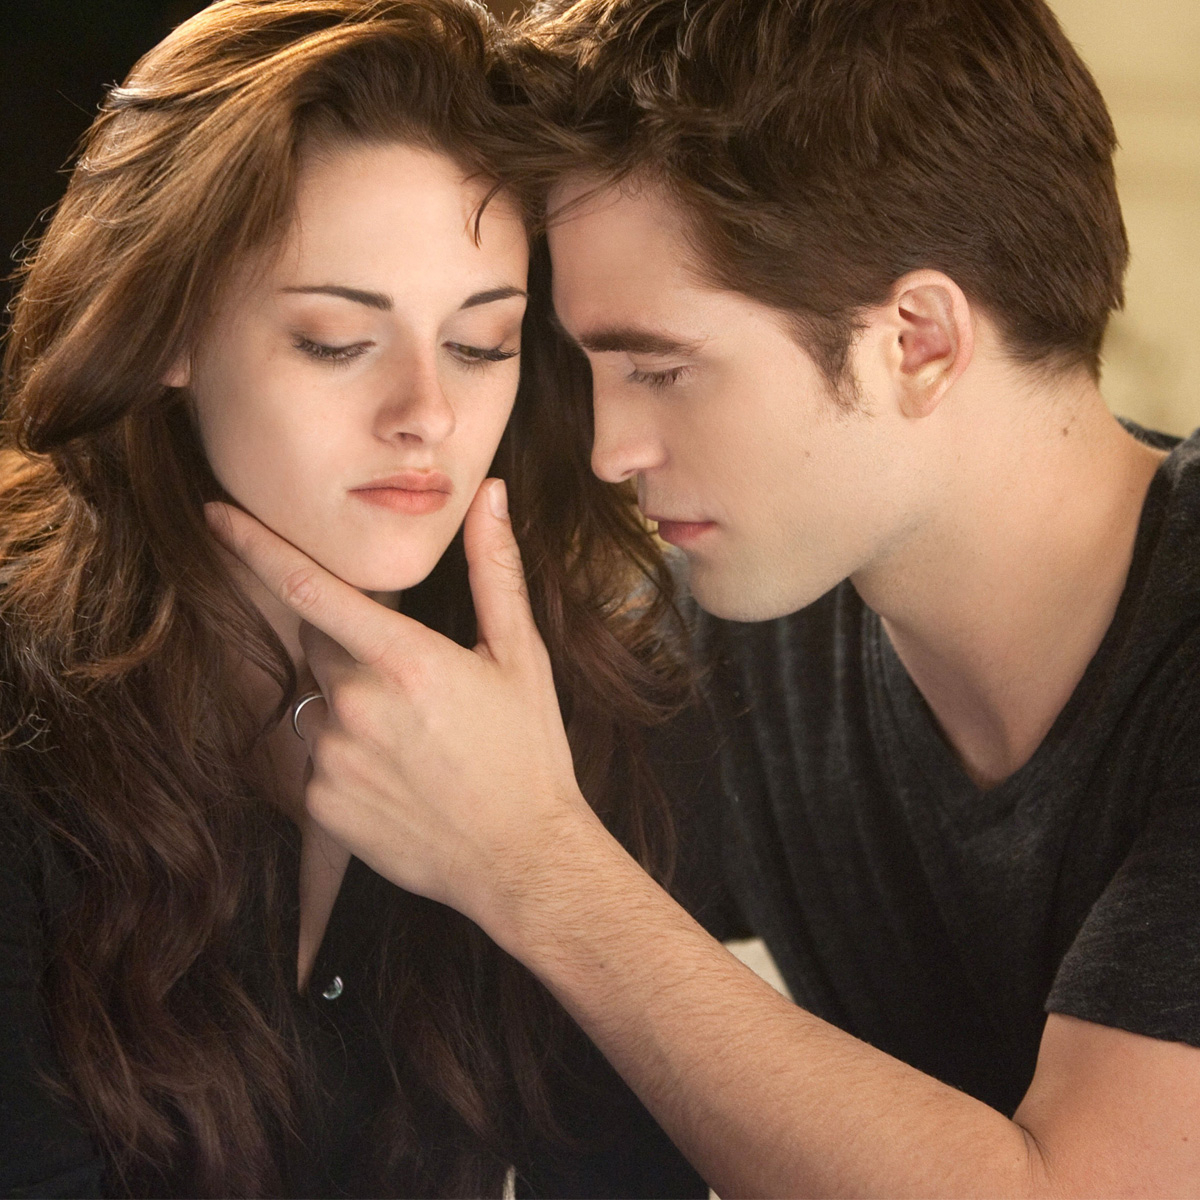 Photos from 34 Surprising Secrets About the Twilight Franchise